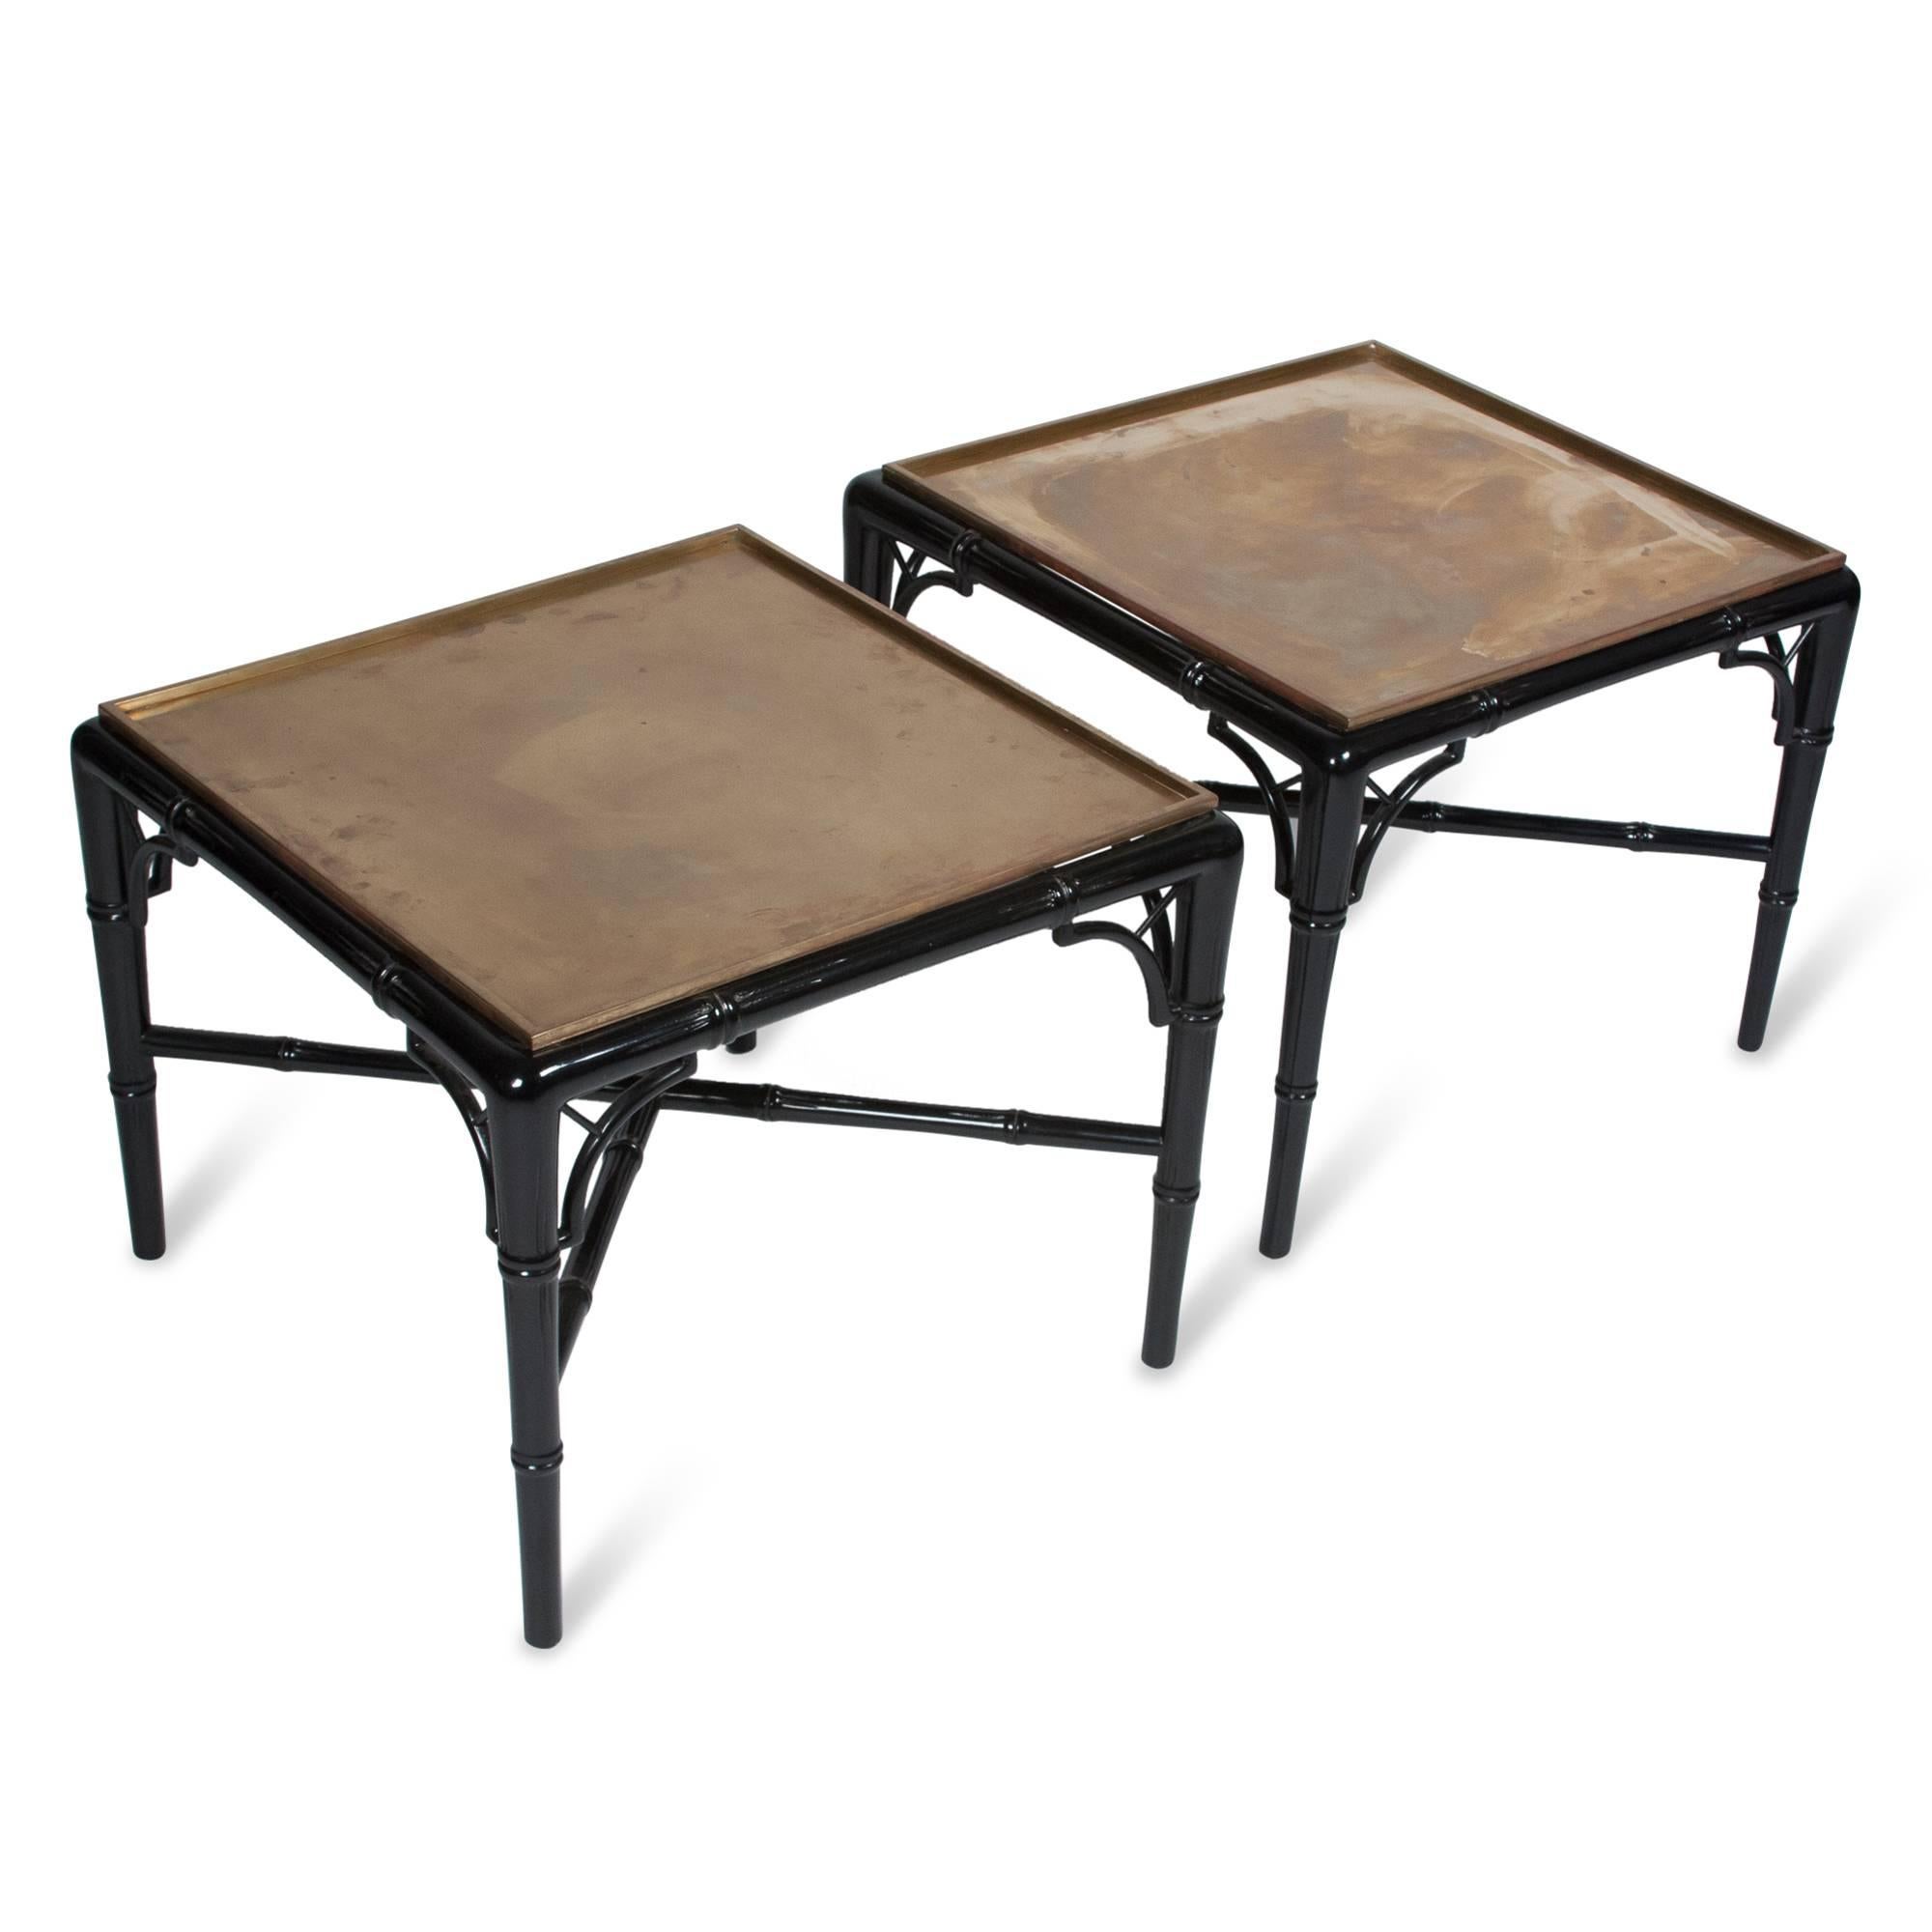 Mid-20th Century Pair of Black Lacquer End Tables by Billy Haines, American, circa 1940